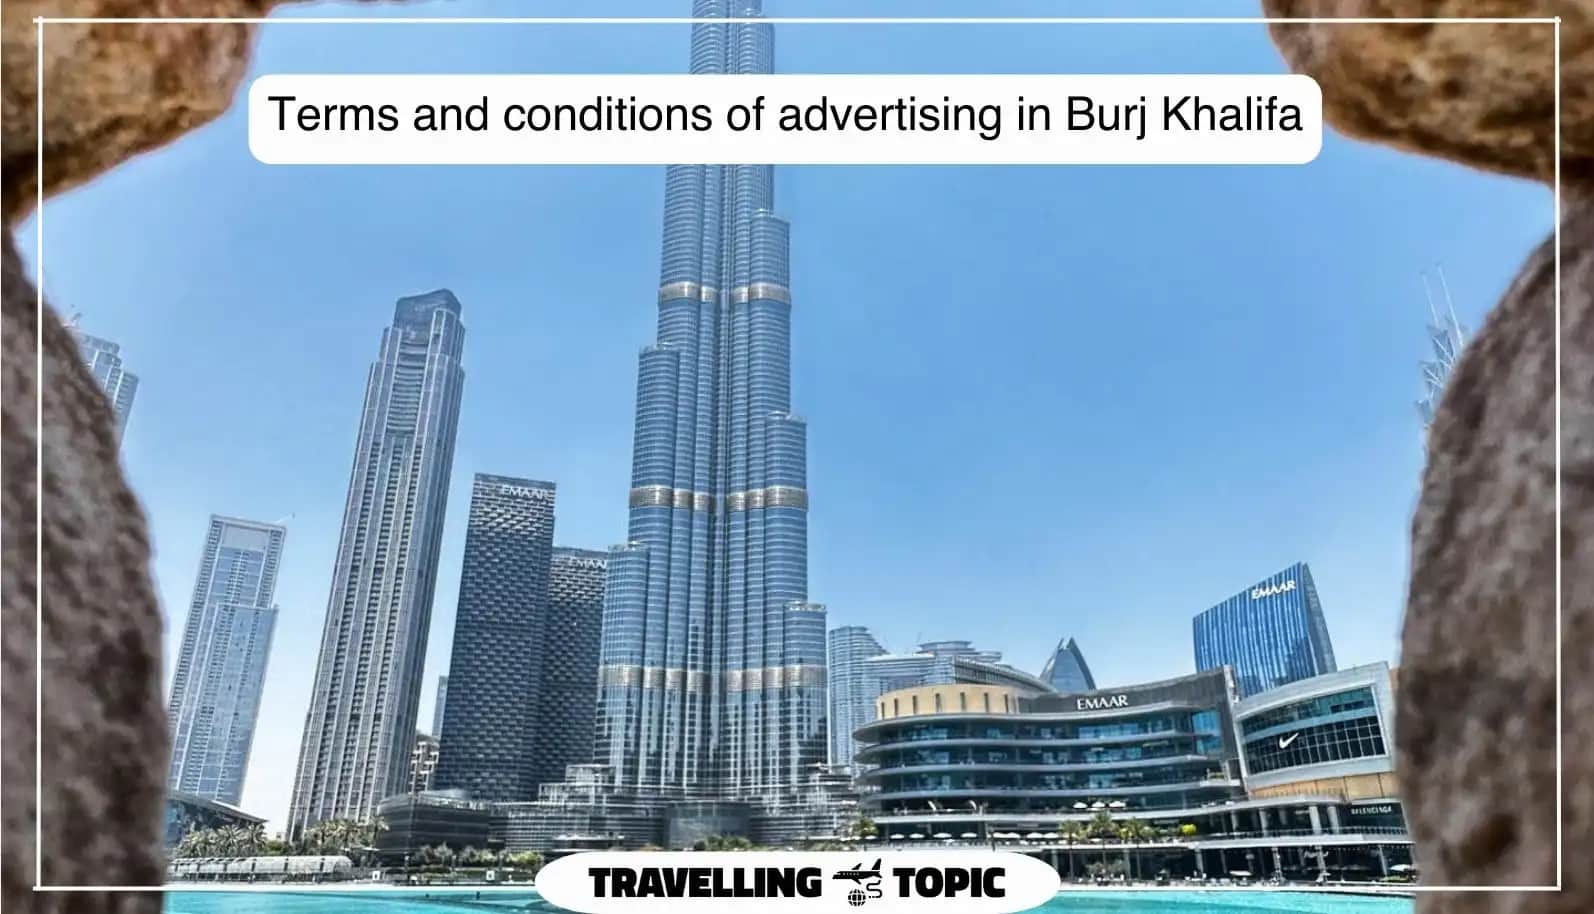 Terms and conditions of advertising in Burj Khalifa